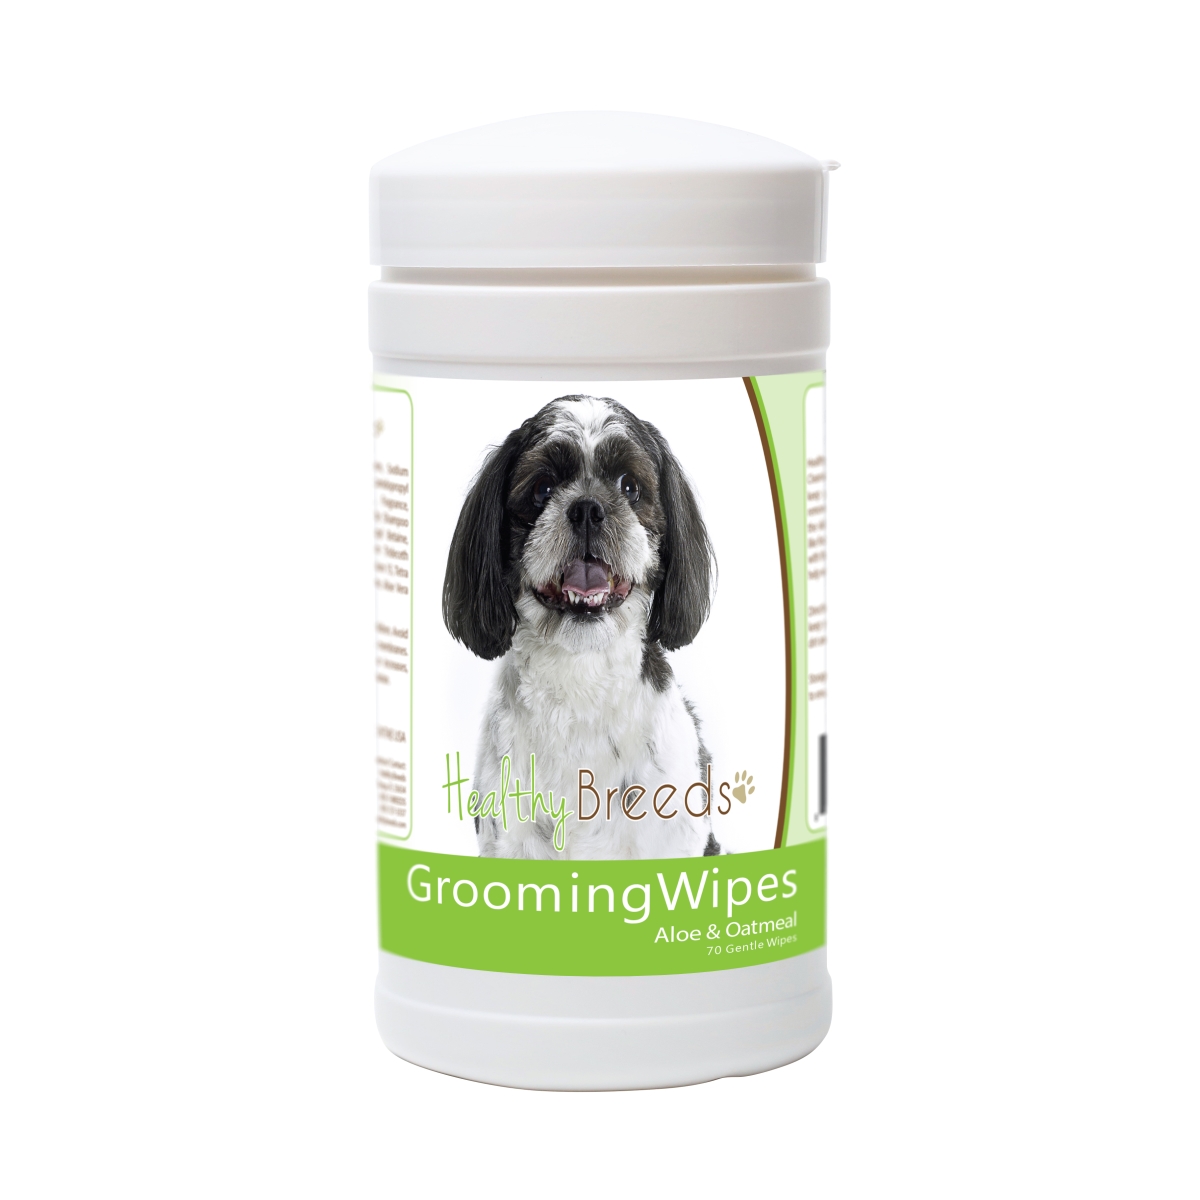 Healthy Breeds 840235179863 Shih-Poo Grooming Wipes - 70 Count